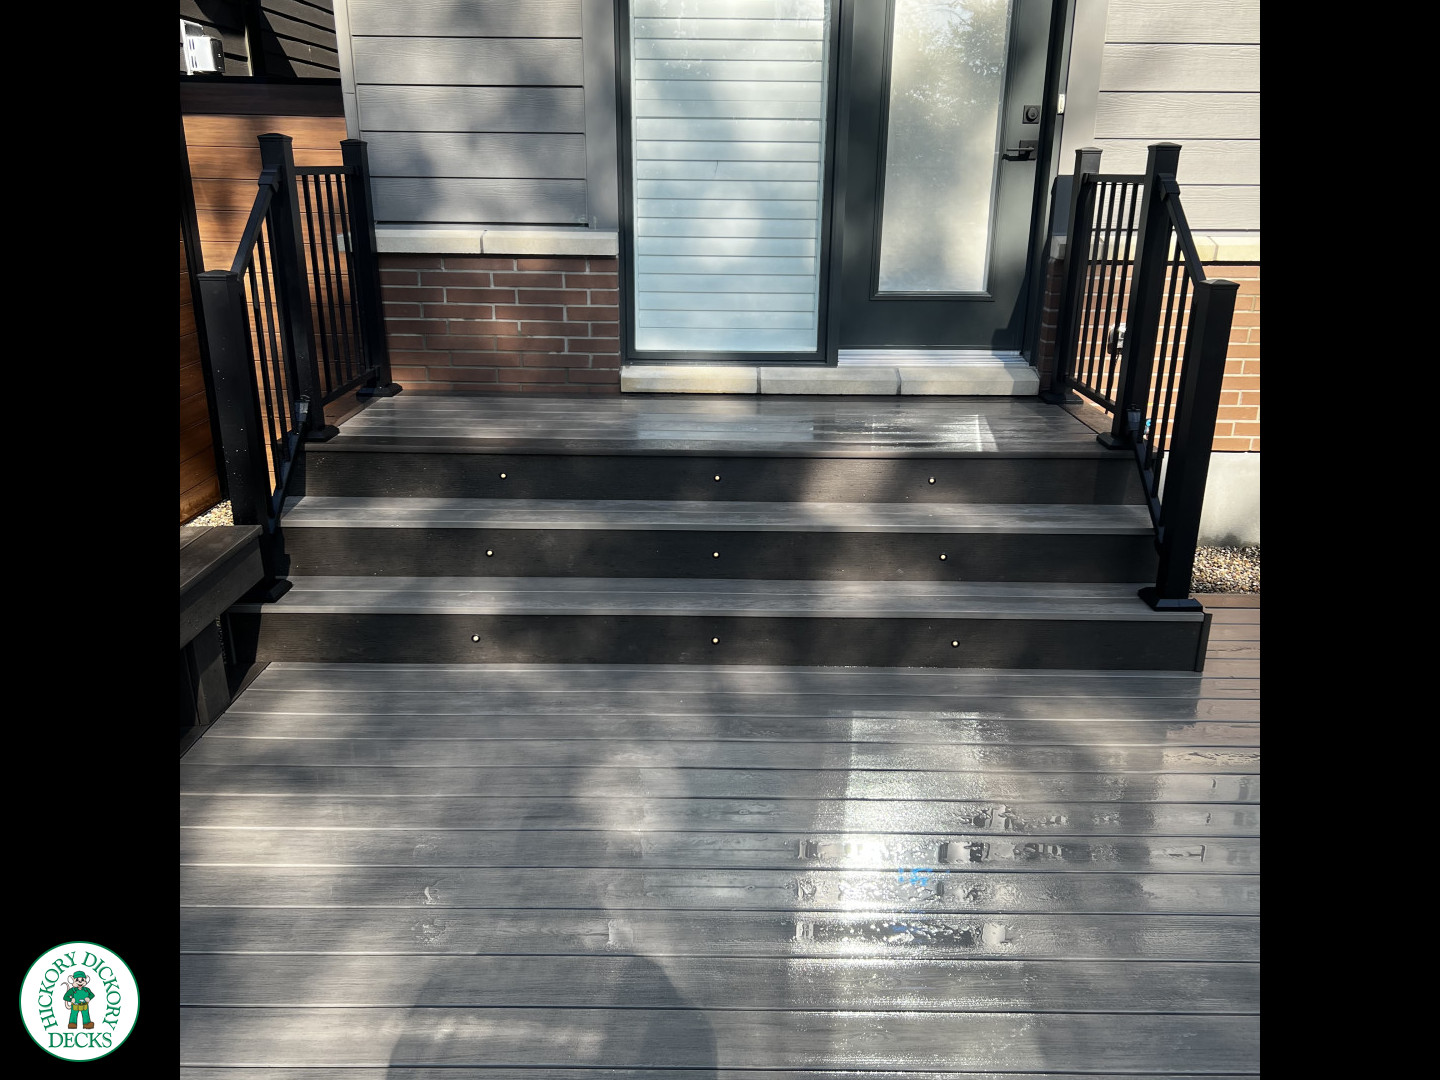 Grey Clubhouse deck with dark grey border, lighting in steps, and a custom bench.